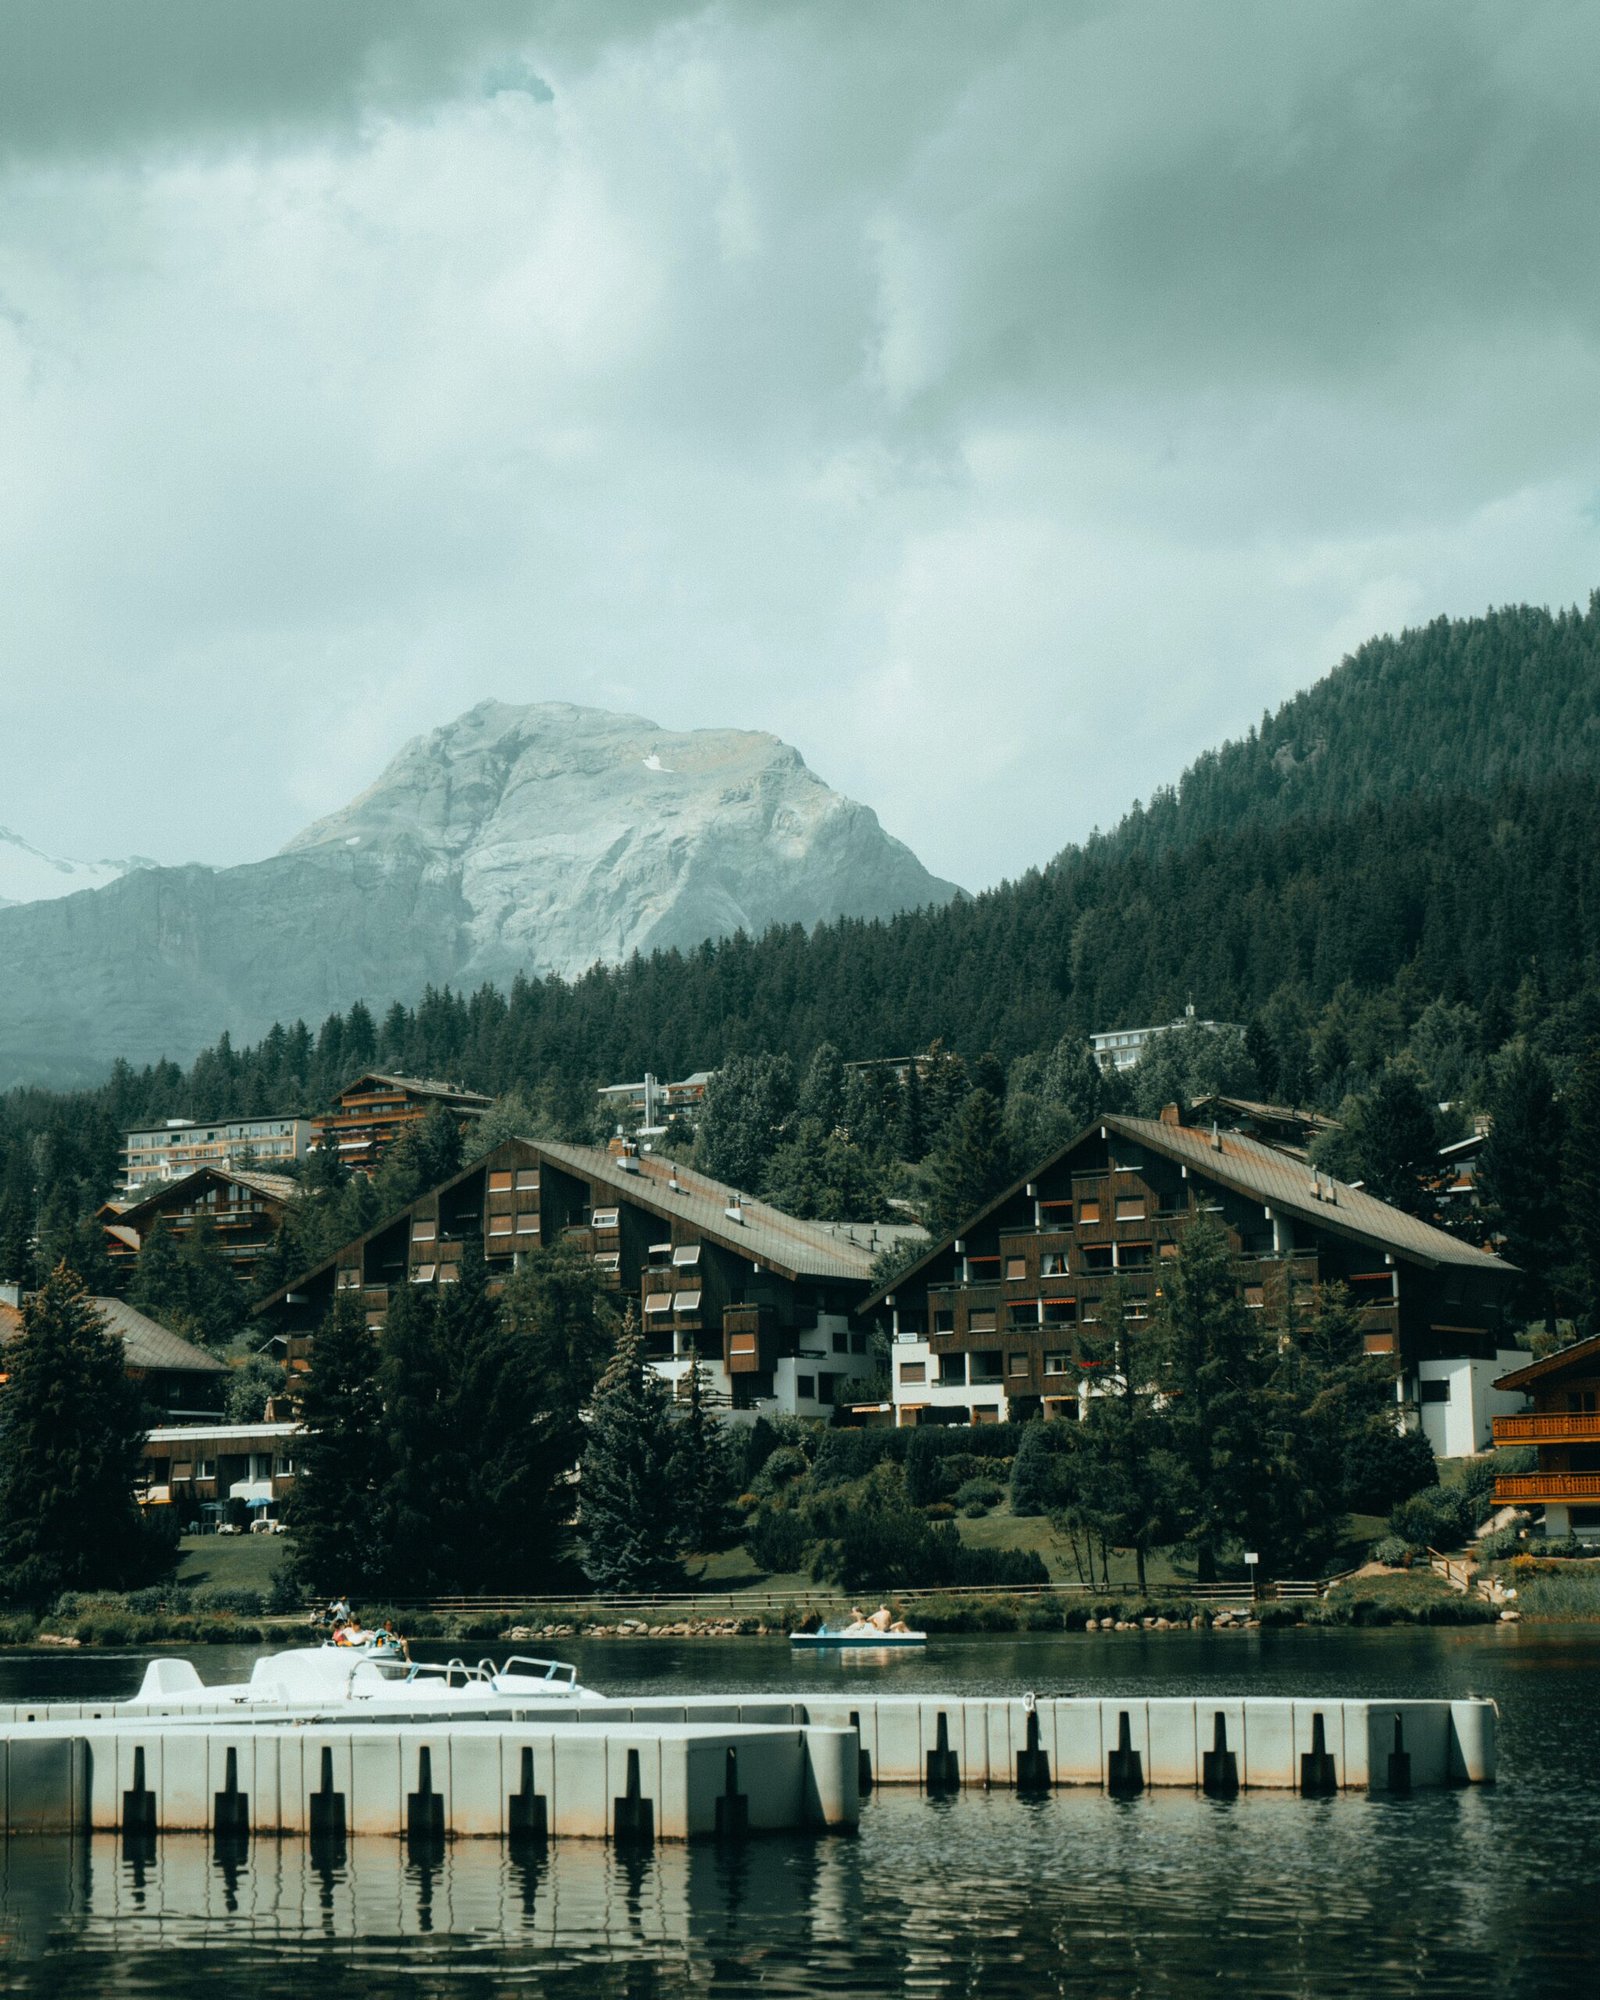 Vail Resorts’ Investment in Crans-Montana: Unlocking Future Prospects